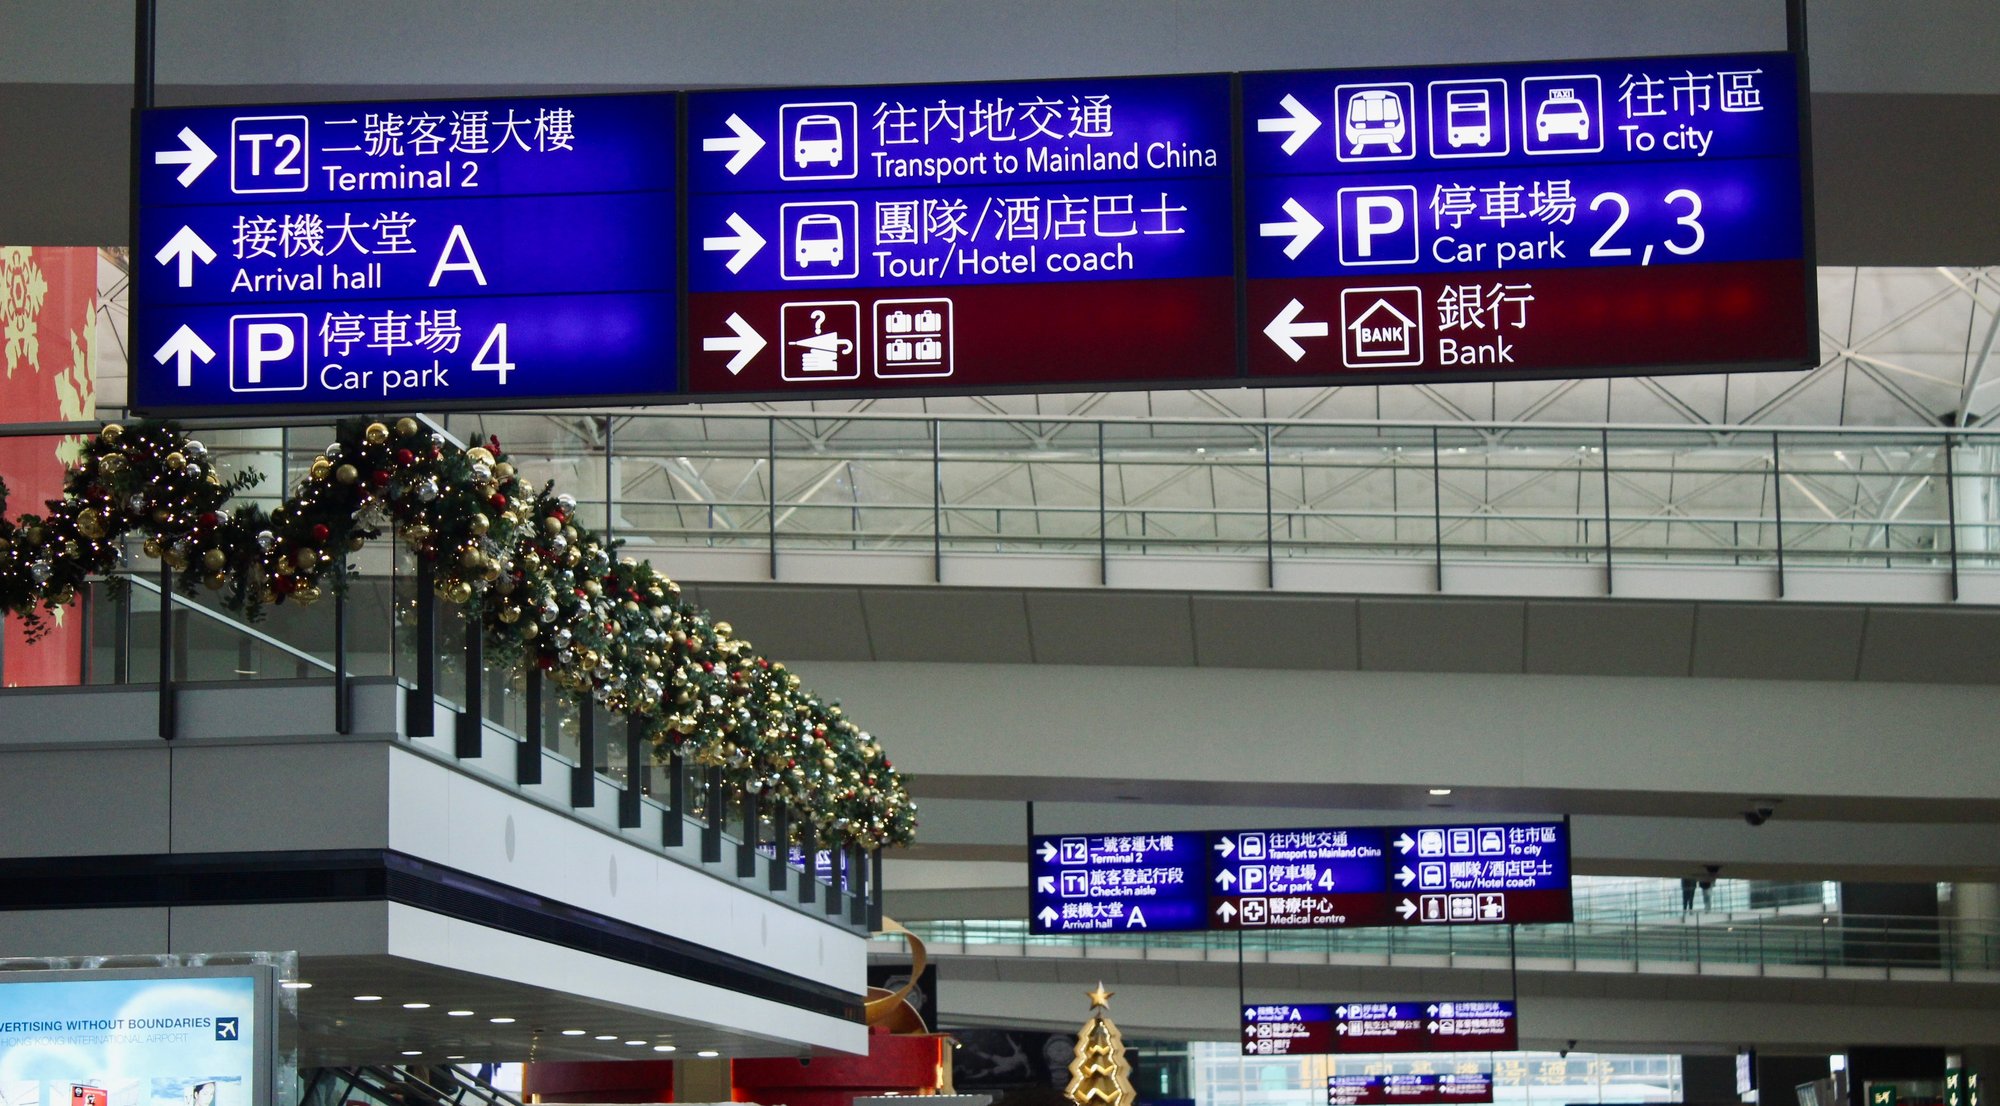 Direction Signs in an airport